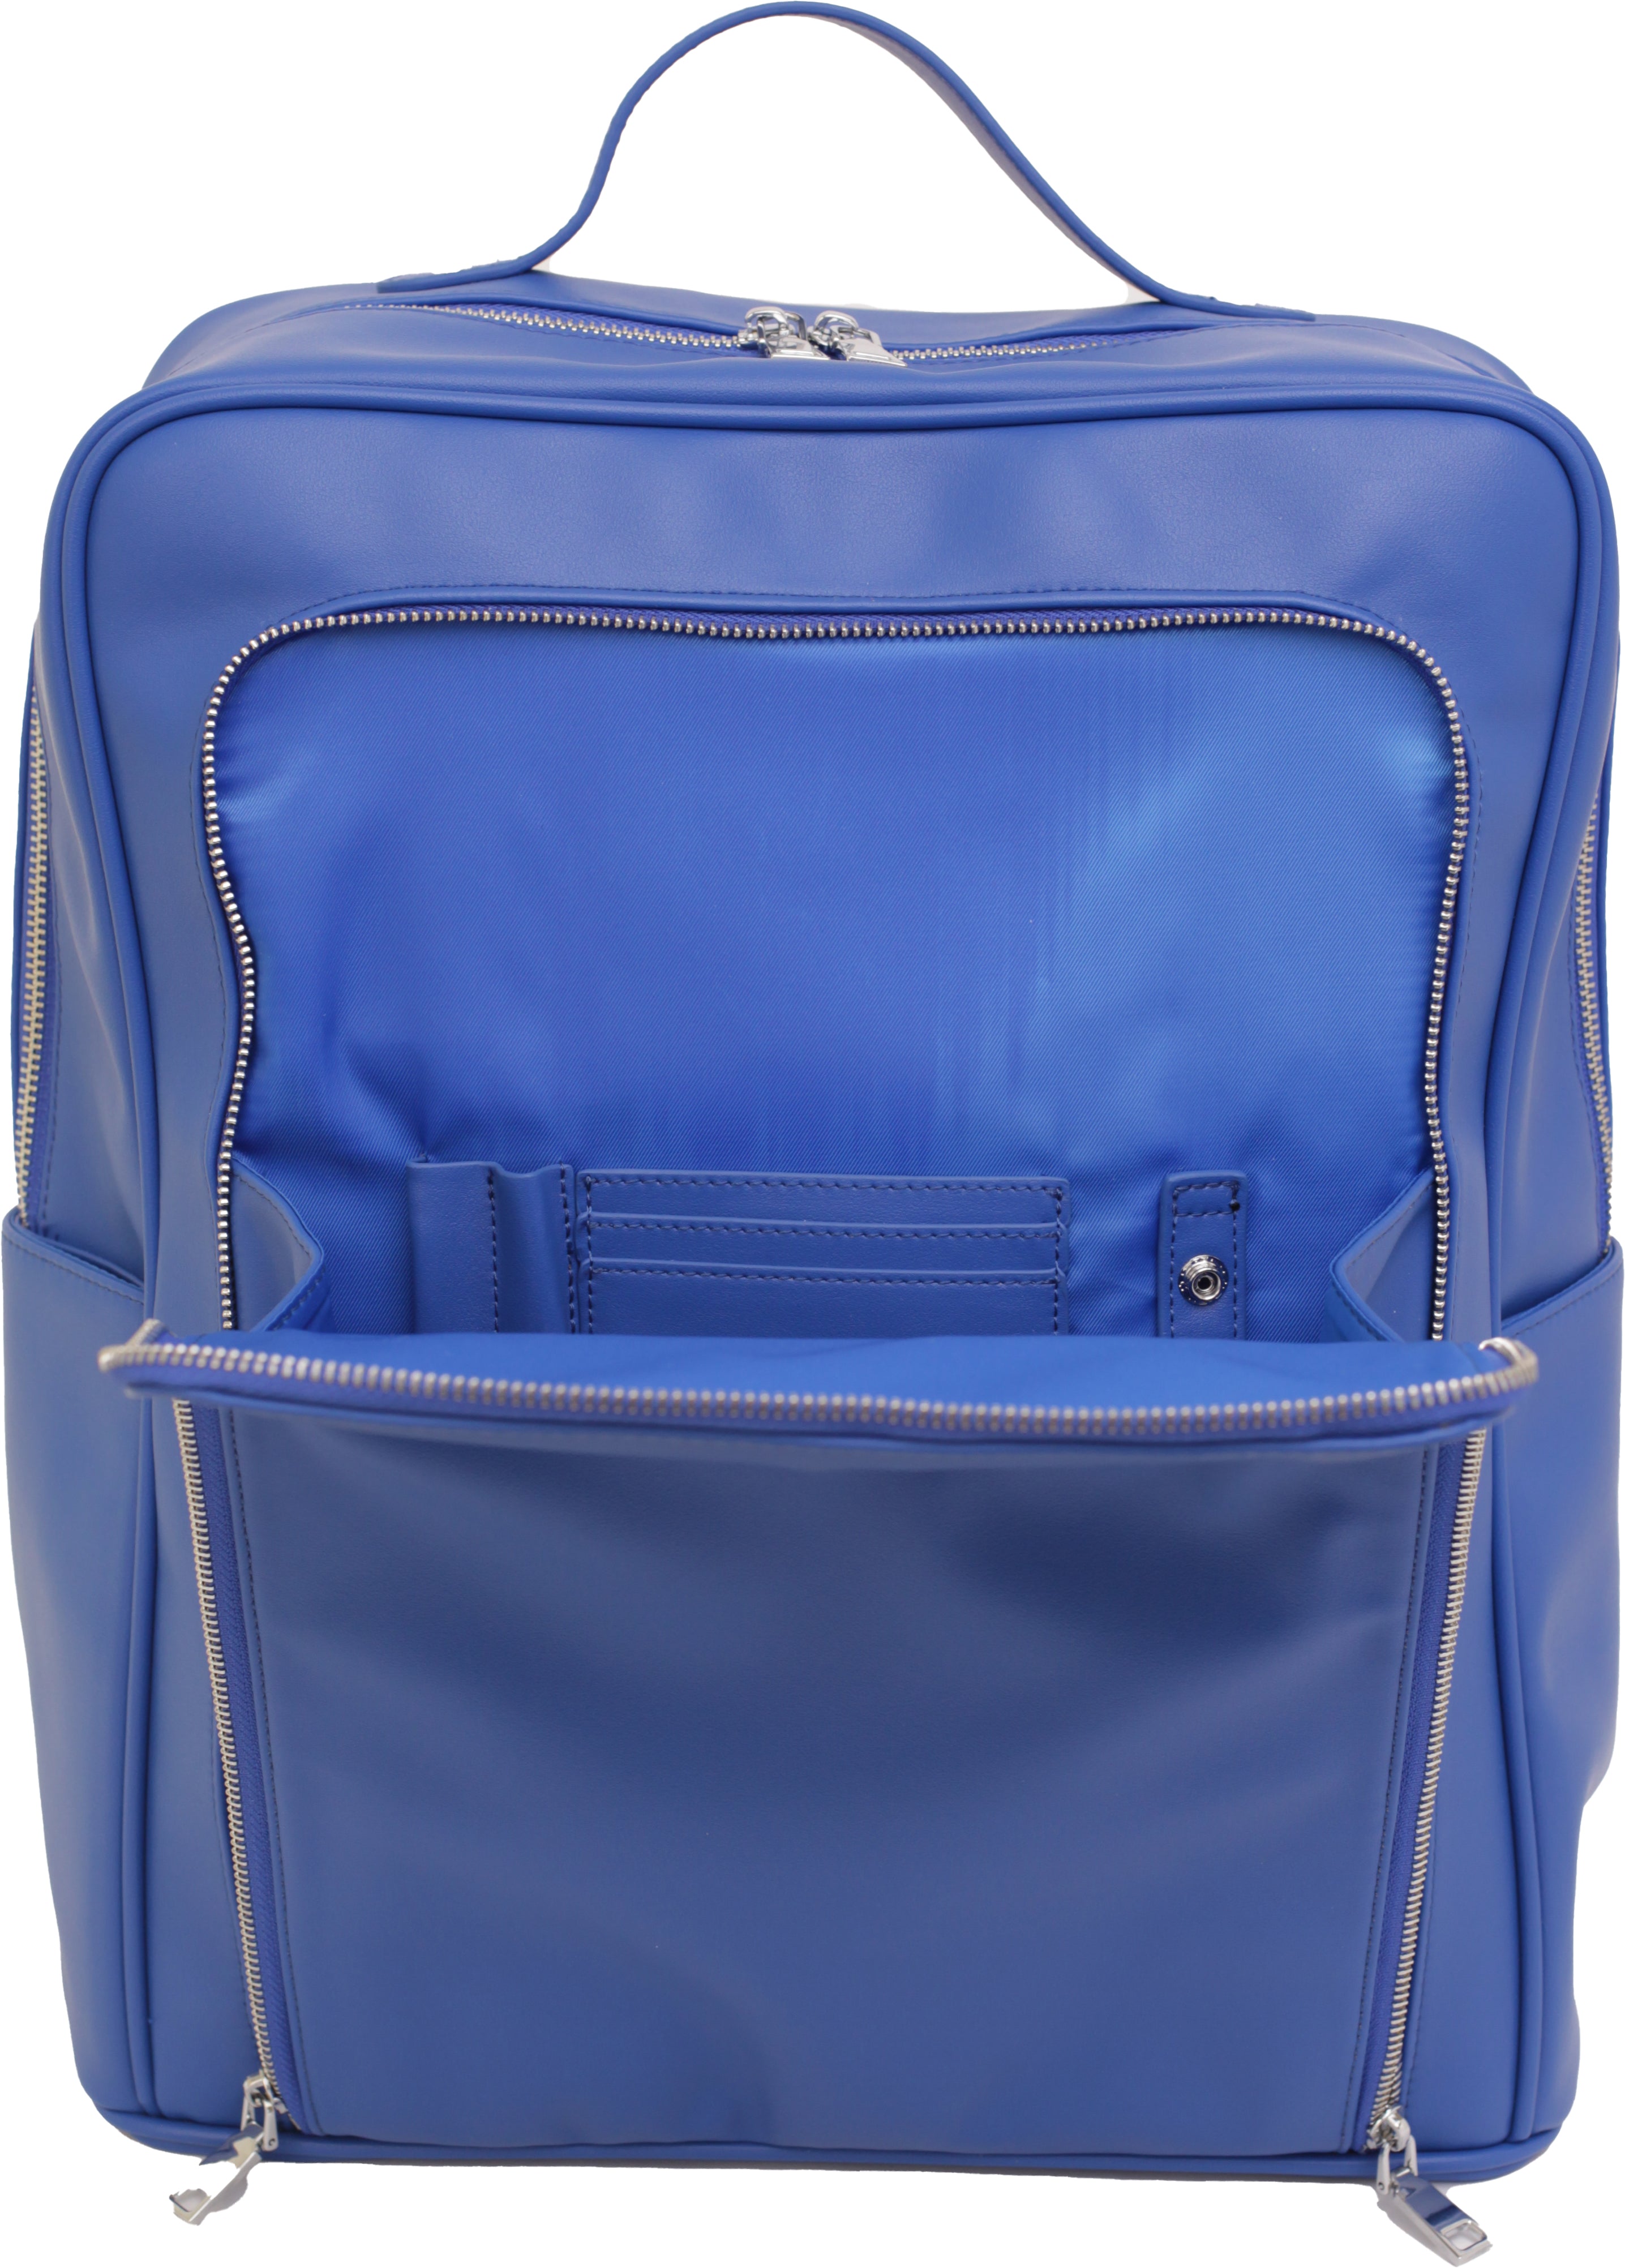 Monochrome offers stylish, elevated products in the six core colors. The Blue Backpack is simply that: blue. Features blue vegan leather. Stain resistant vegan leather. Bright blue backpack for those wanting plain and stylish backpack. Perfect for an upscale urban backpack and an everyday backpack. 